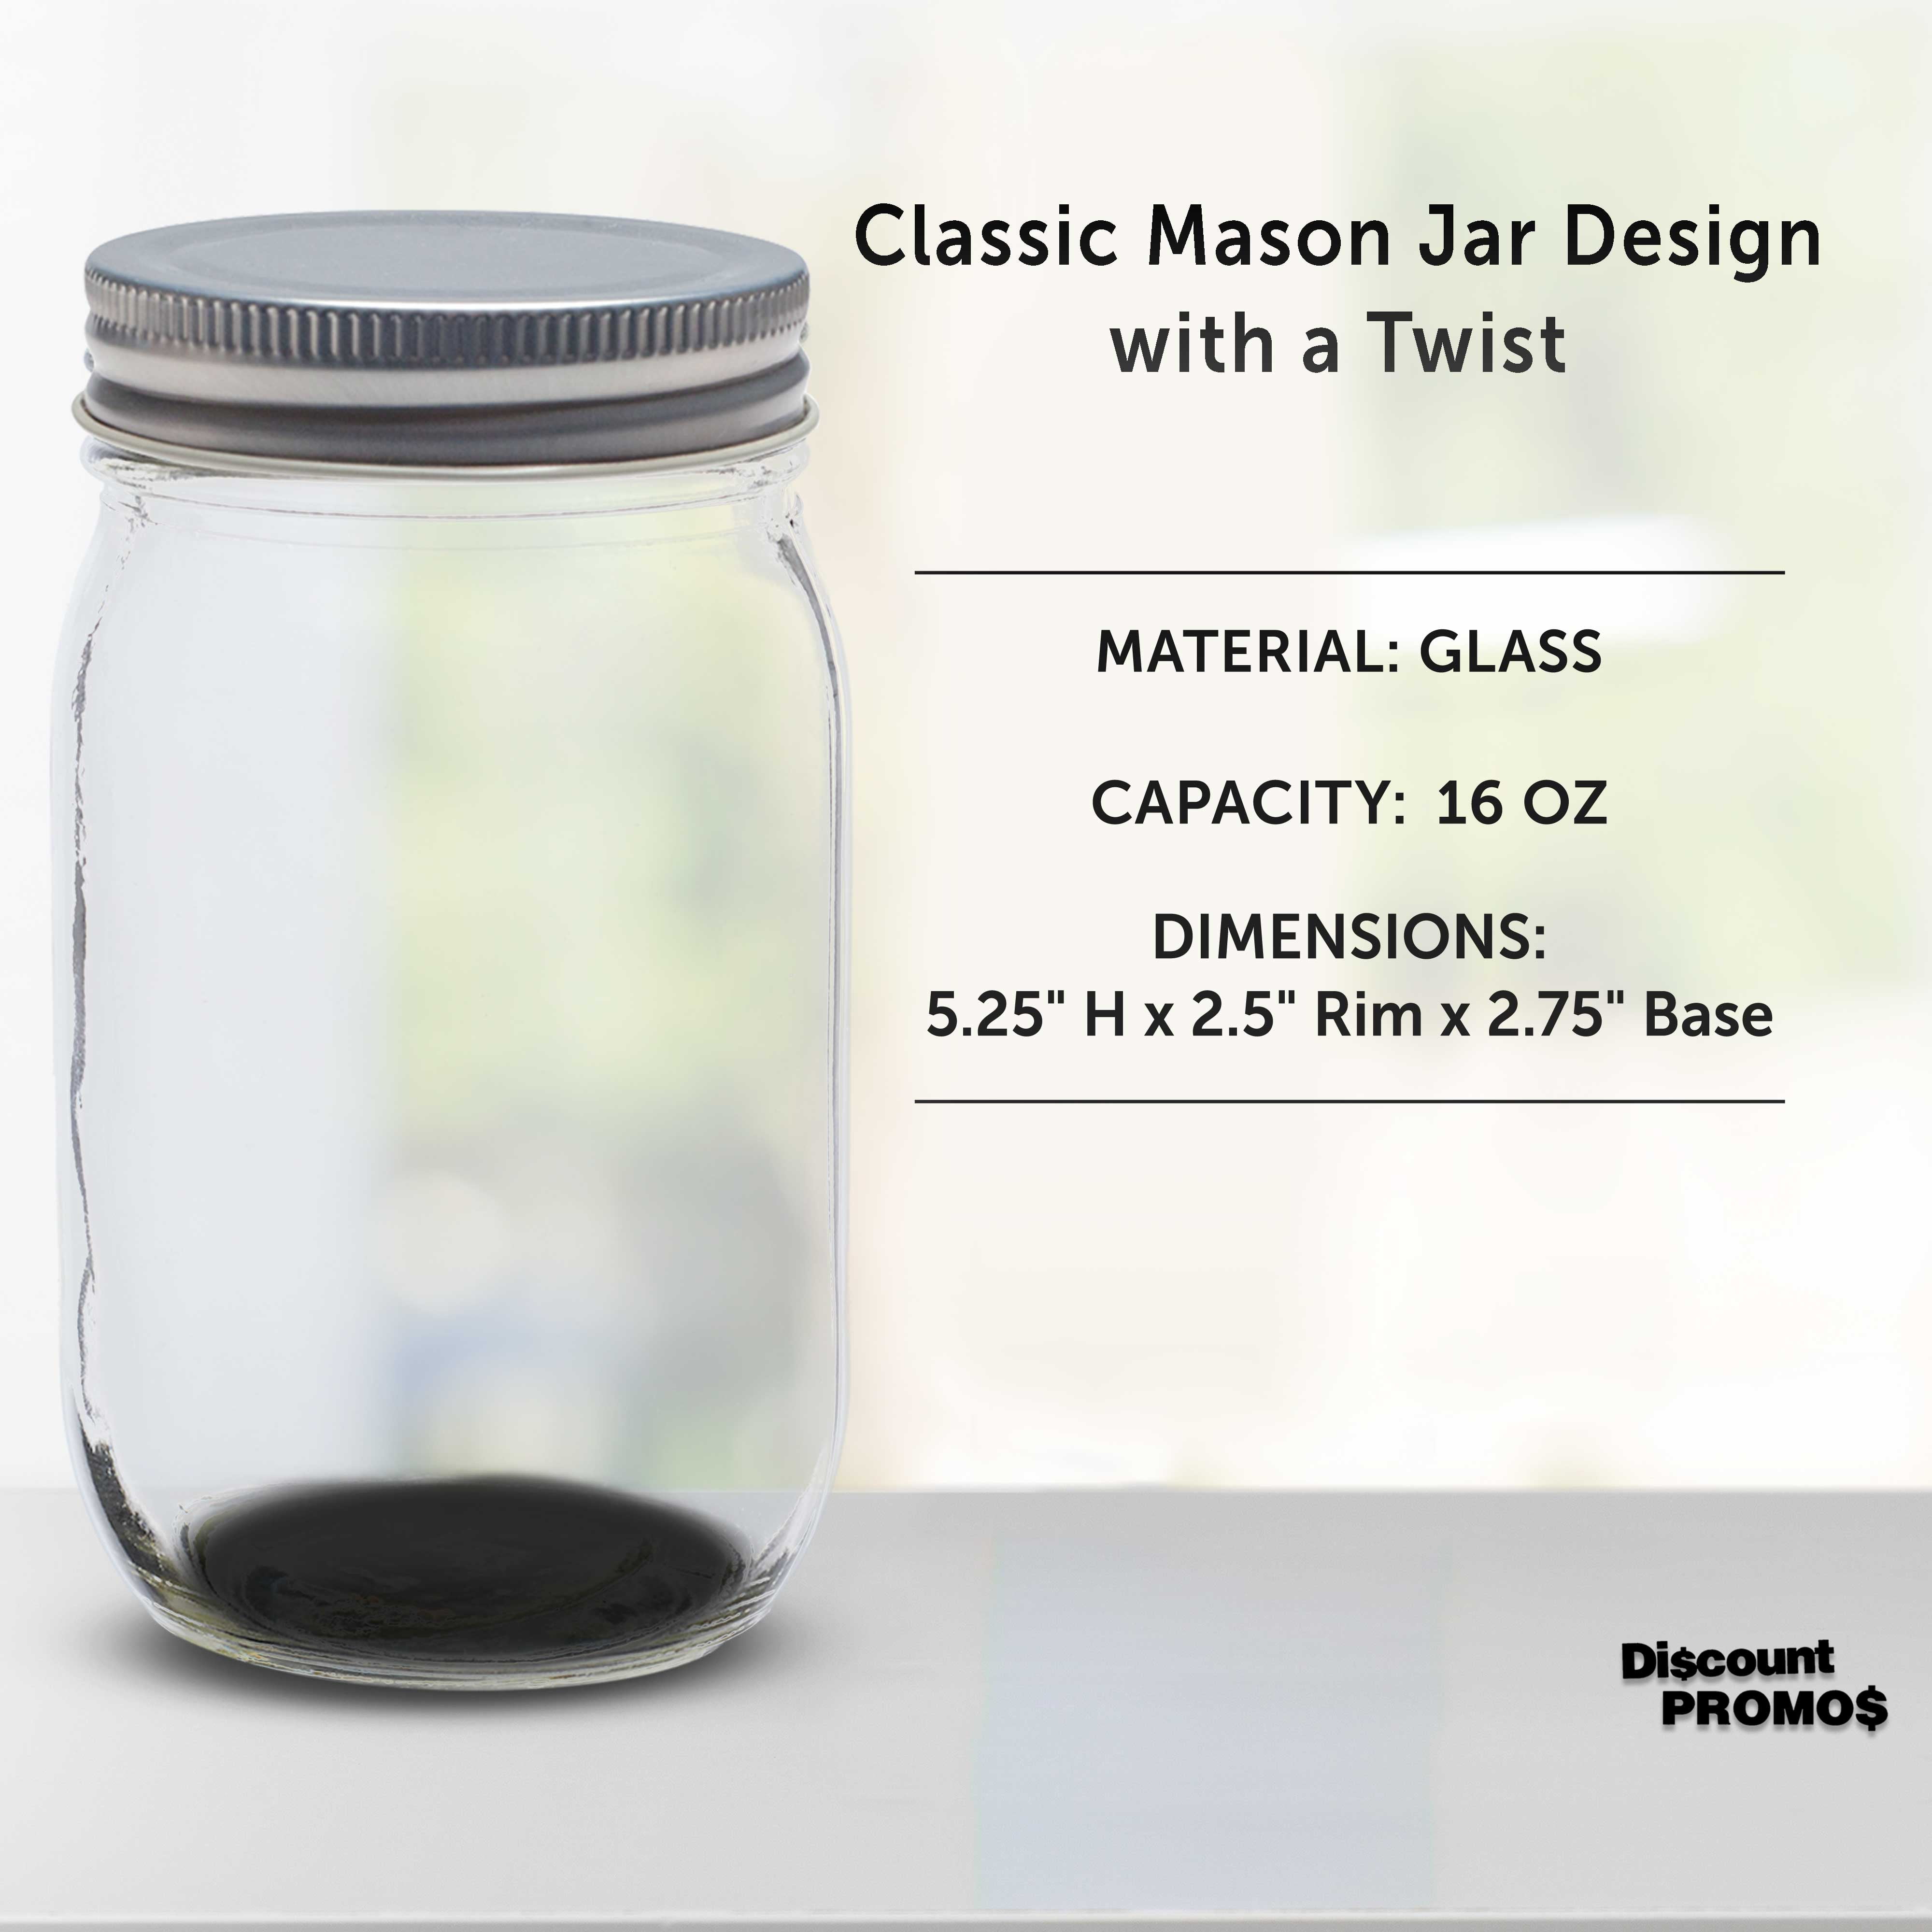 DISCOUNT PROMOS Custom Mason Jars with Lids 16 oz. Set of 50, Personalized  Bulk Pack - Glass Jars for Overnight Oats, Candies, Fruits, Pickles